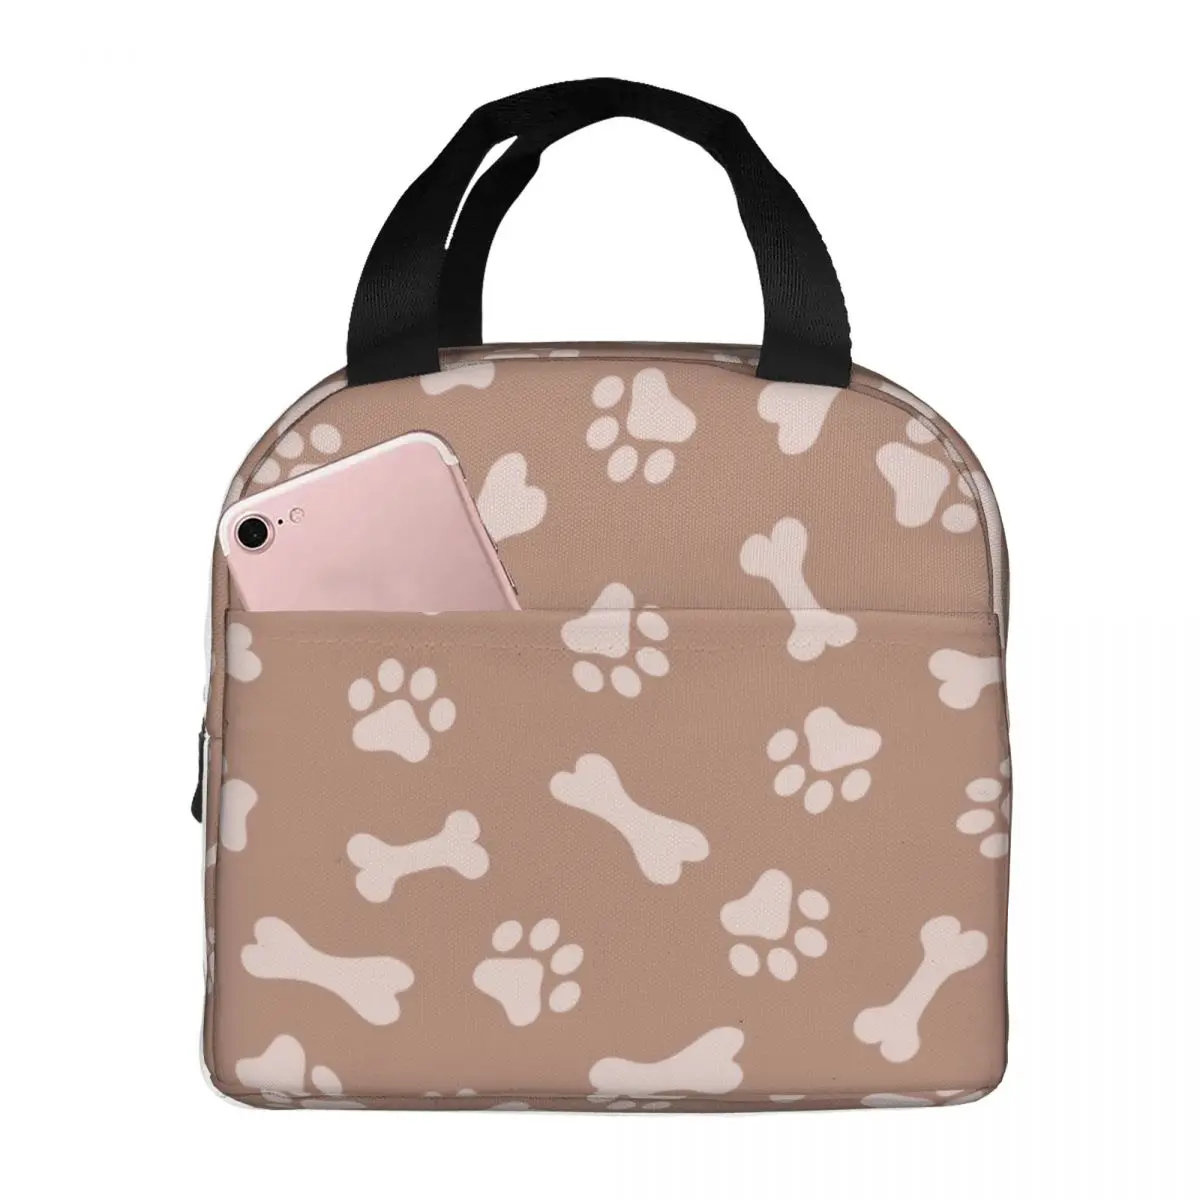 Cute Animal Paw Pattern Lunch Bag Portable Insulated Canvas Cooler Bags Thermal Cold Food Picnic Travel Lunch Box for Women Girl